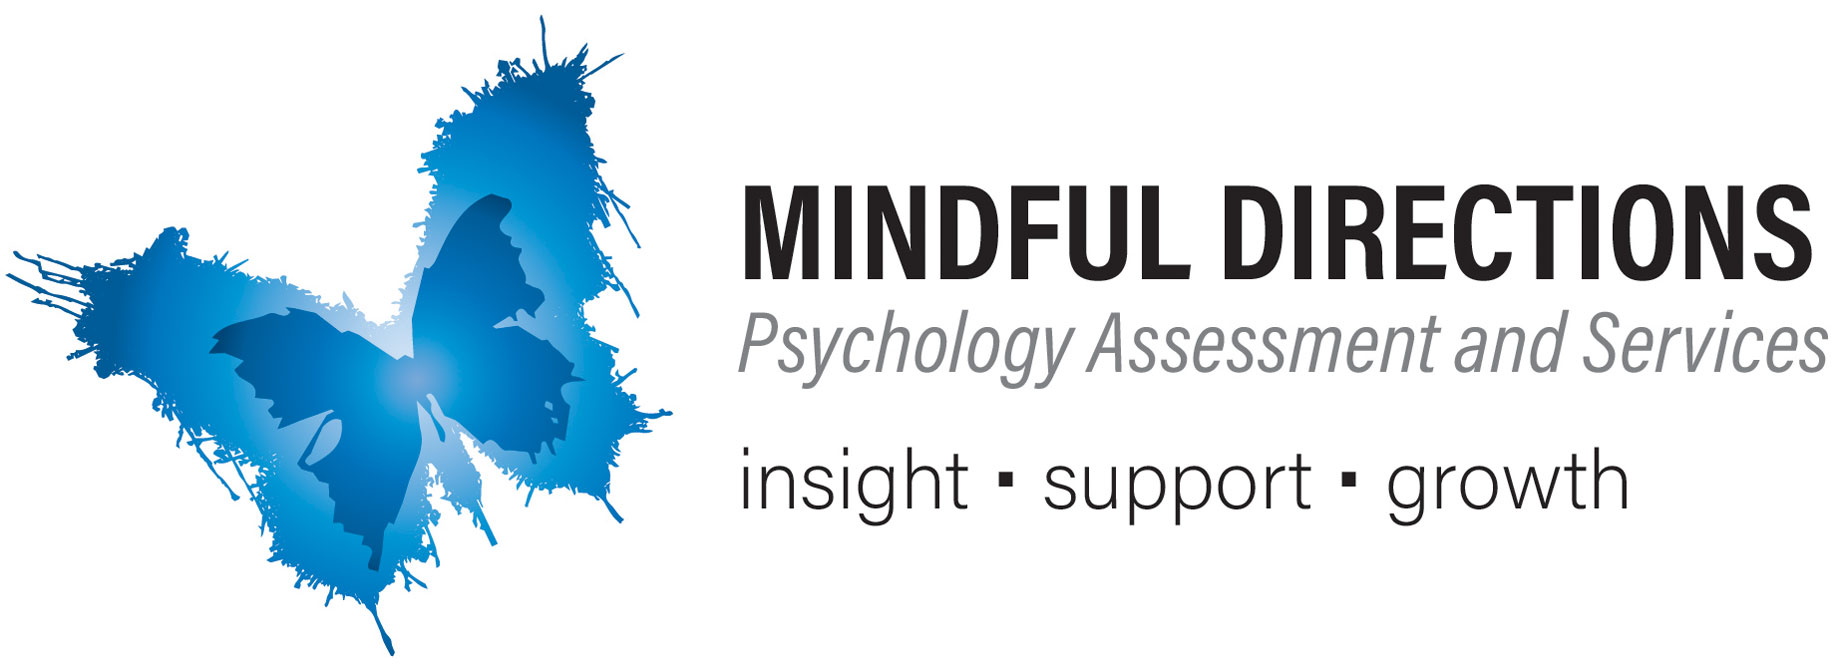 Mindful Directions Psychology Assessment & Services - Auckland North Shore and Hibiscus Coast (logo)